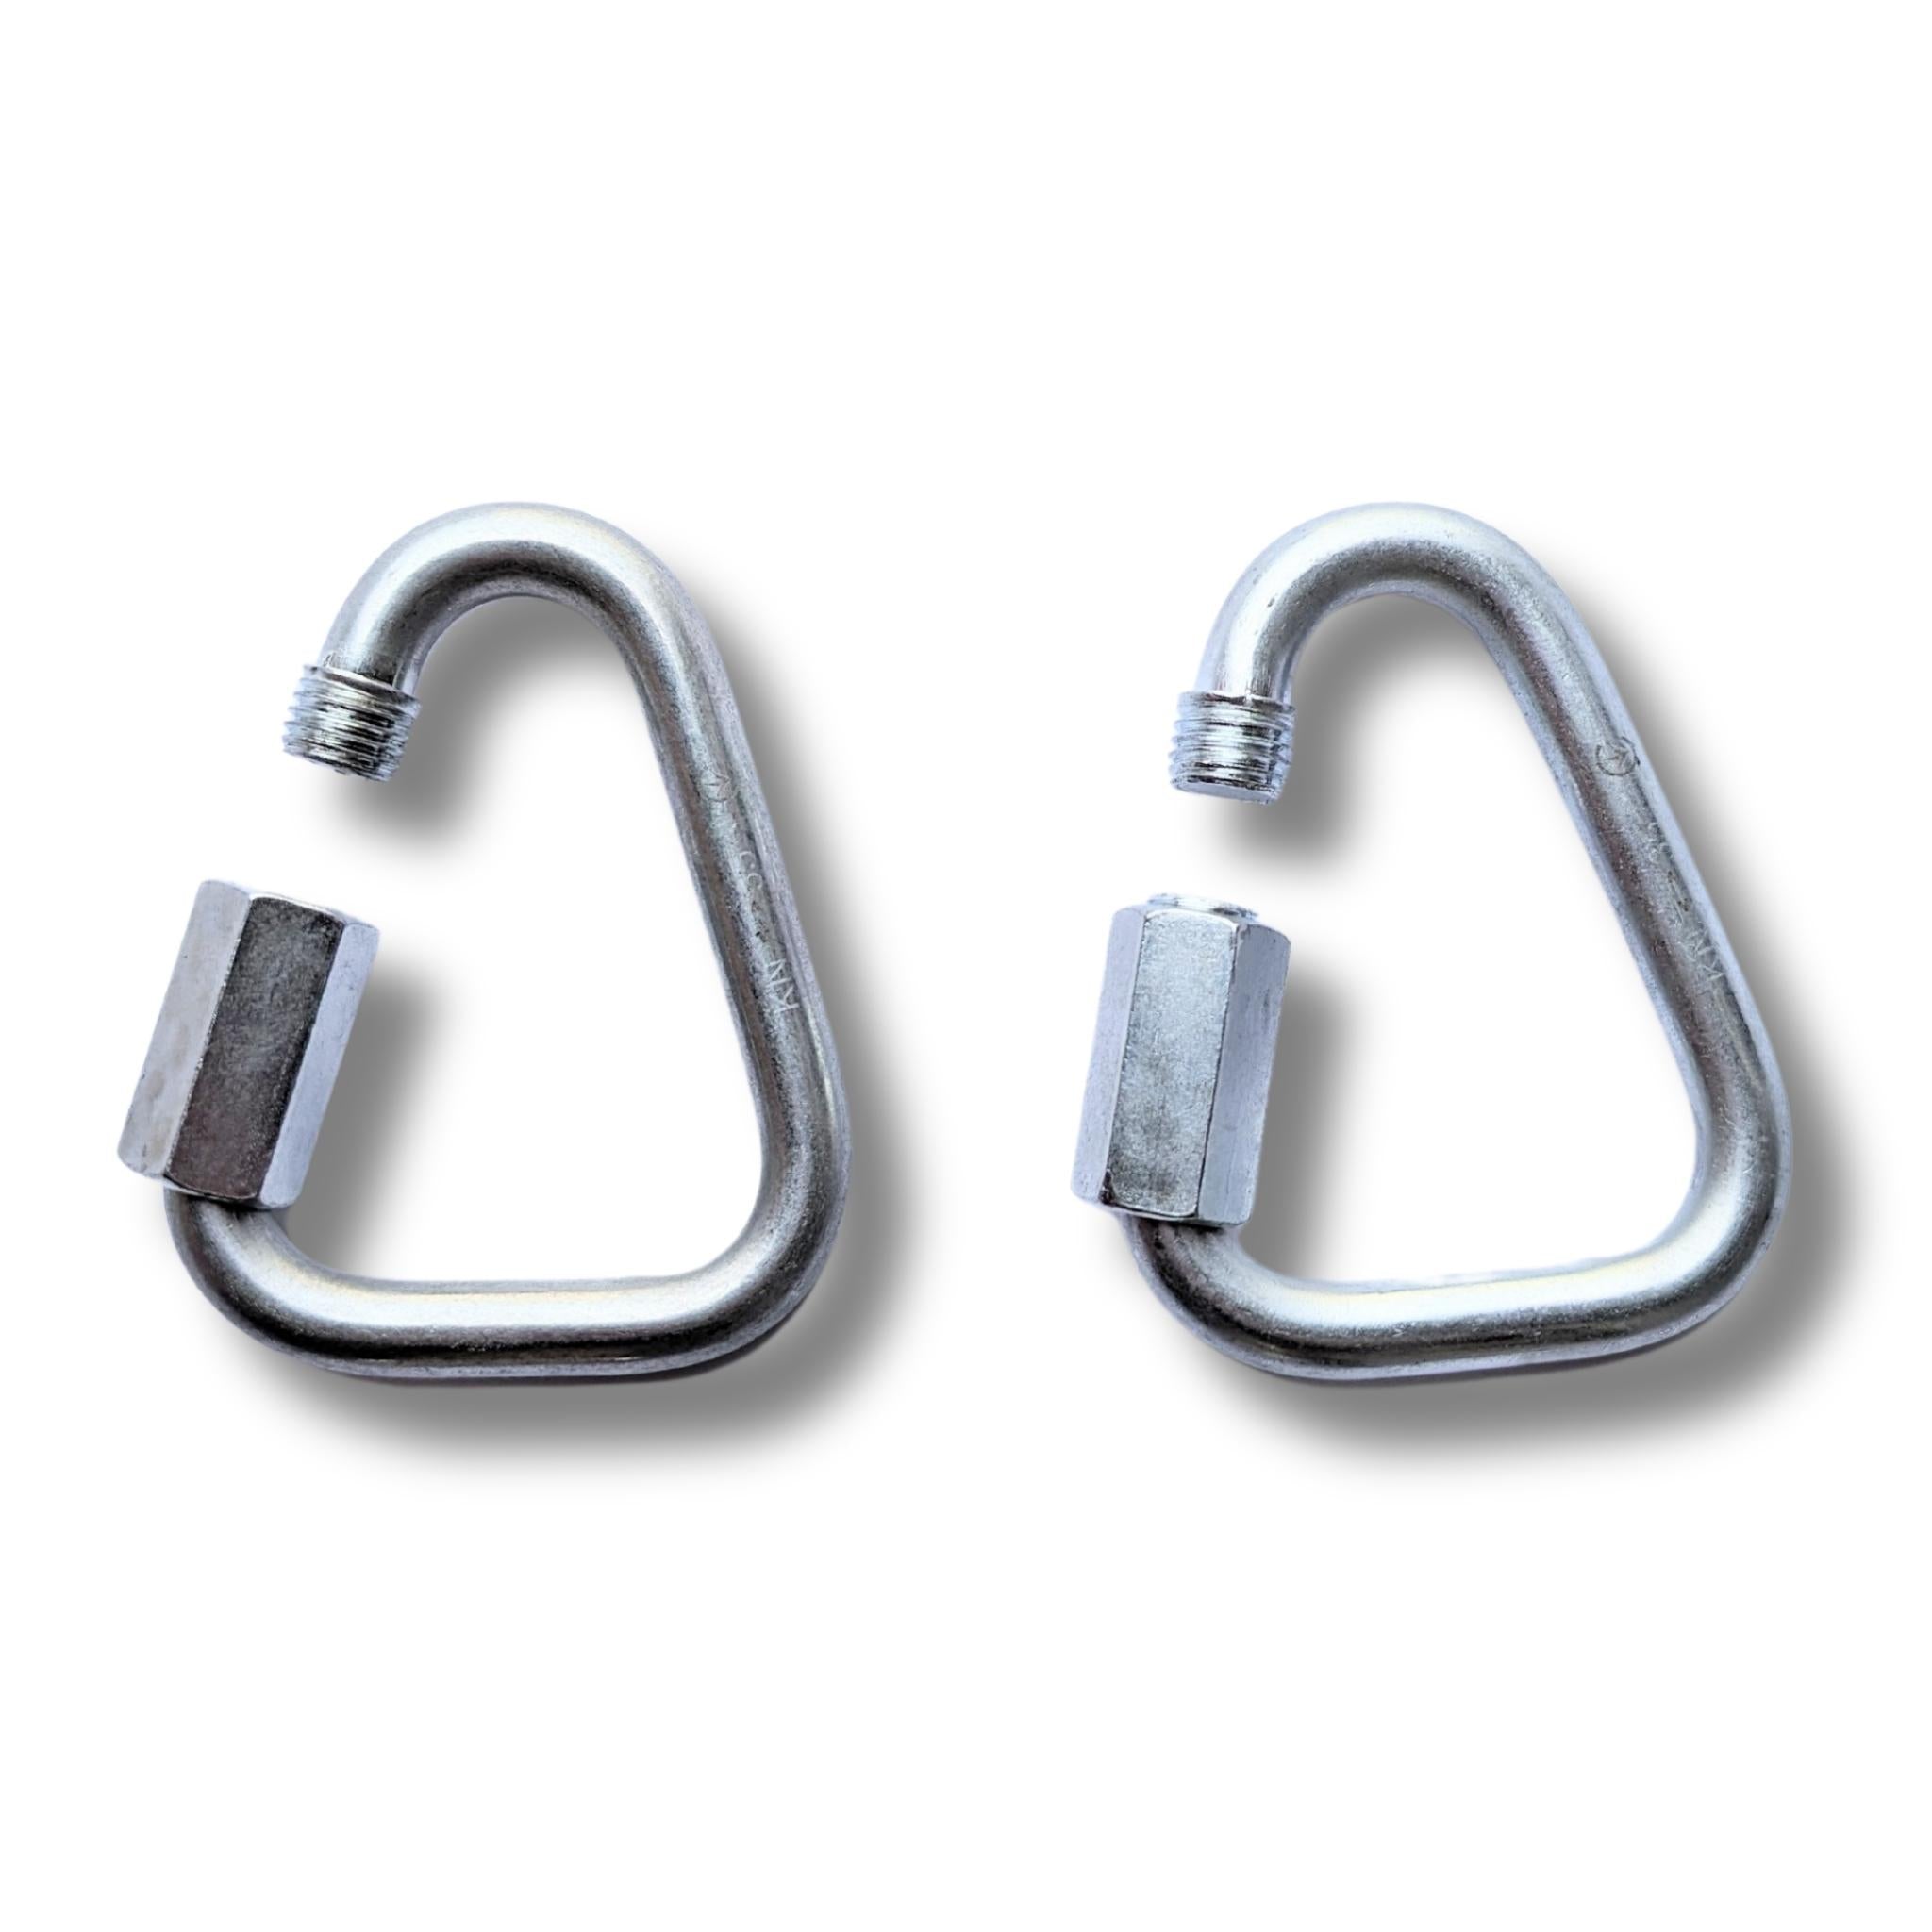 Triangle carabiner for aerial straps & bodyloops